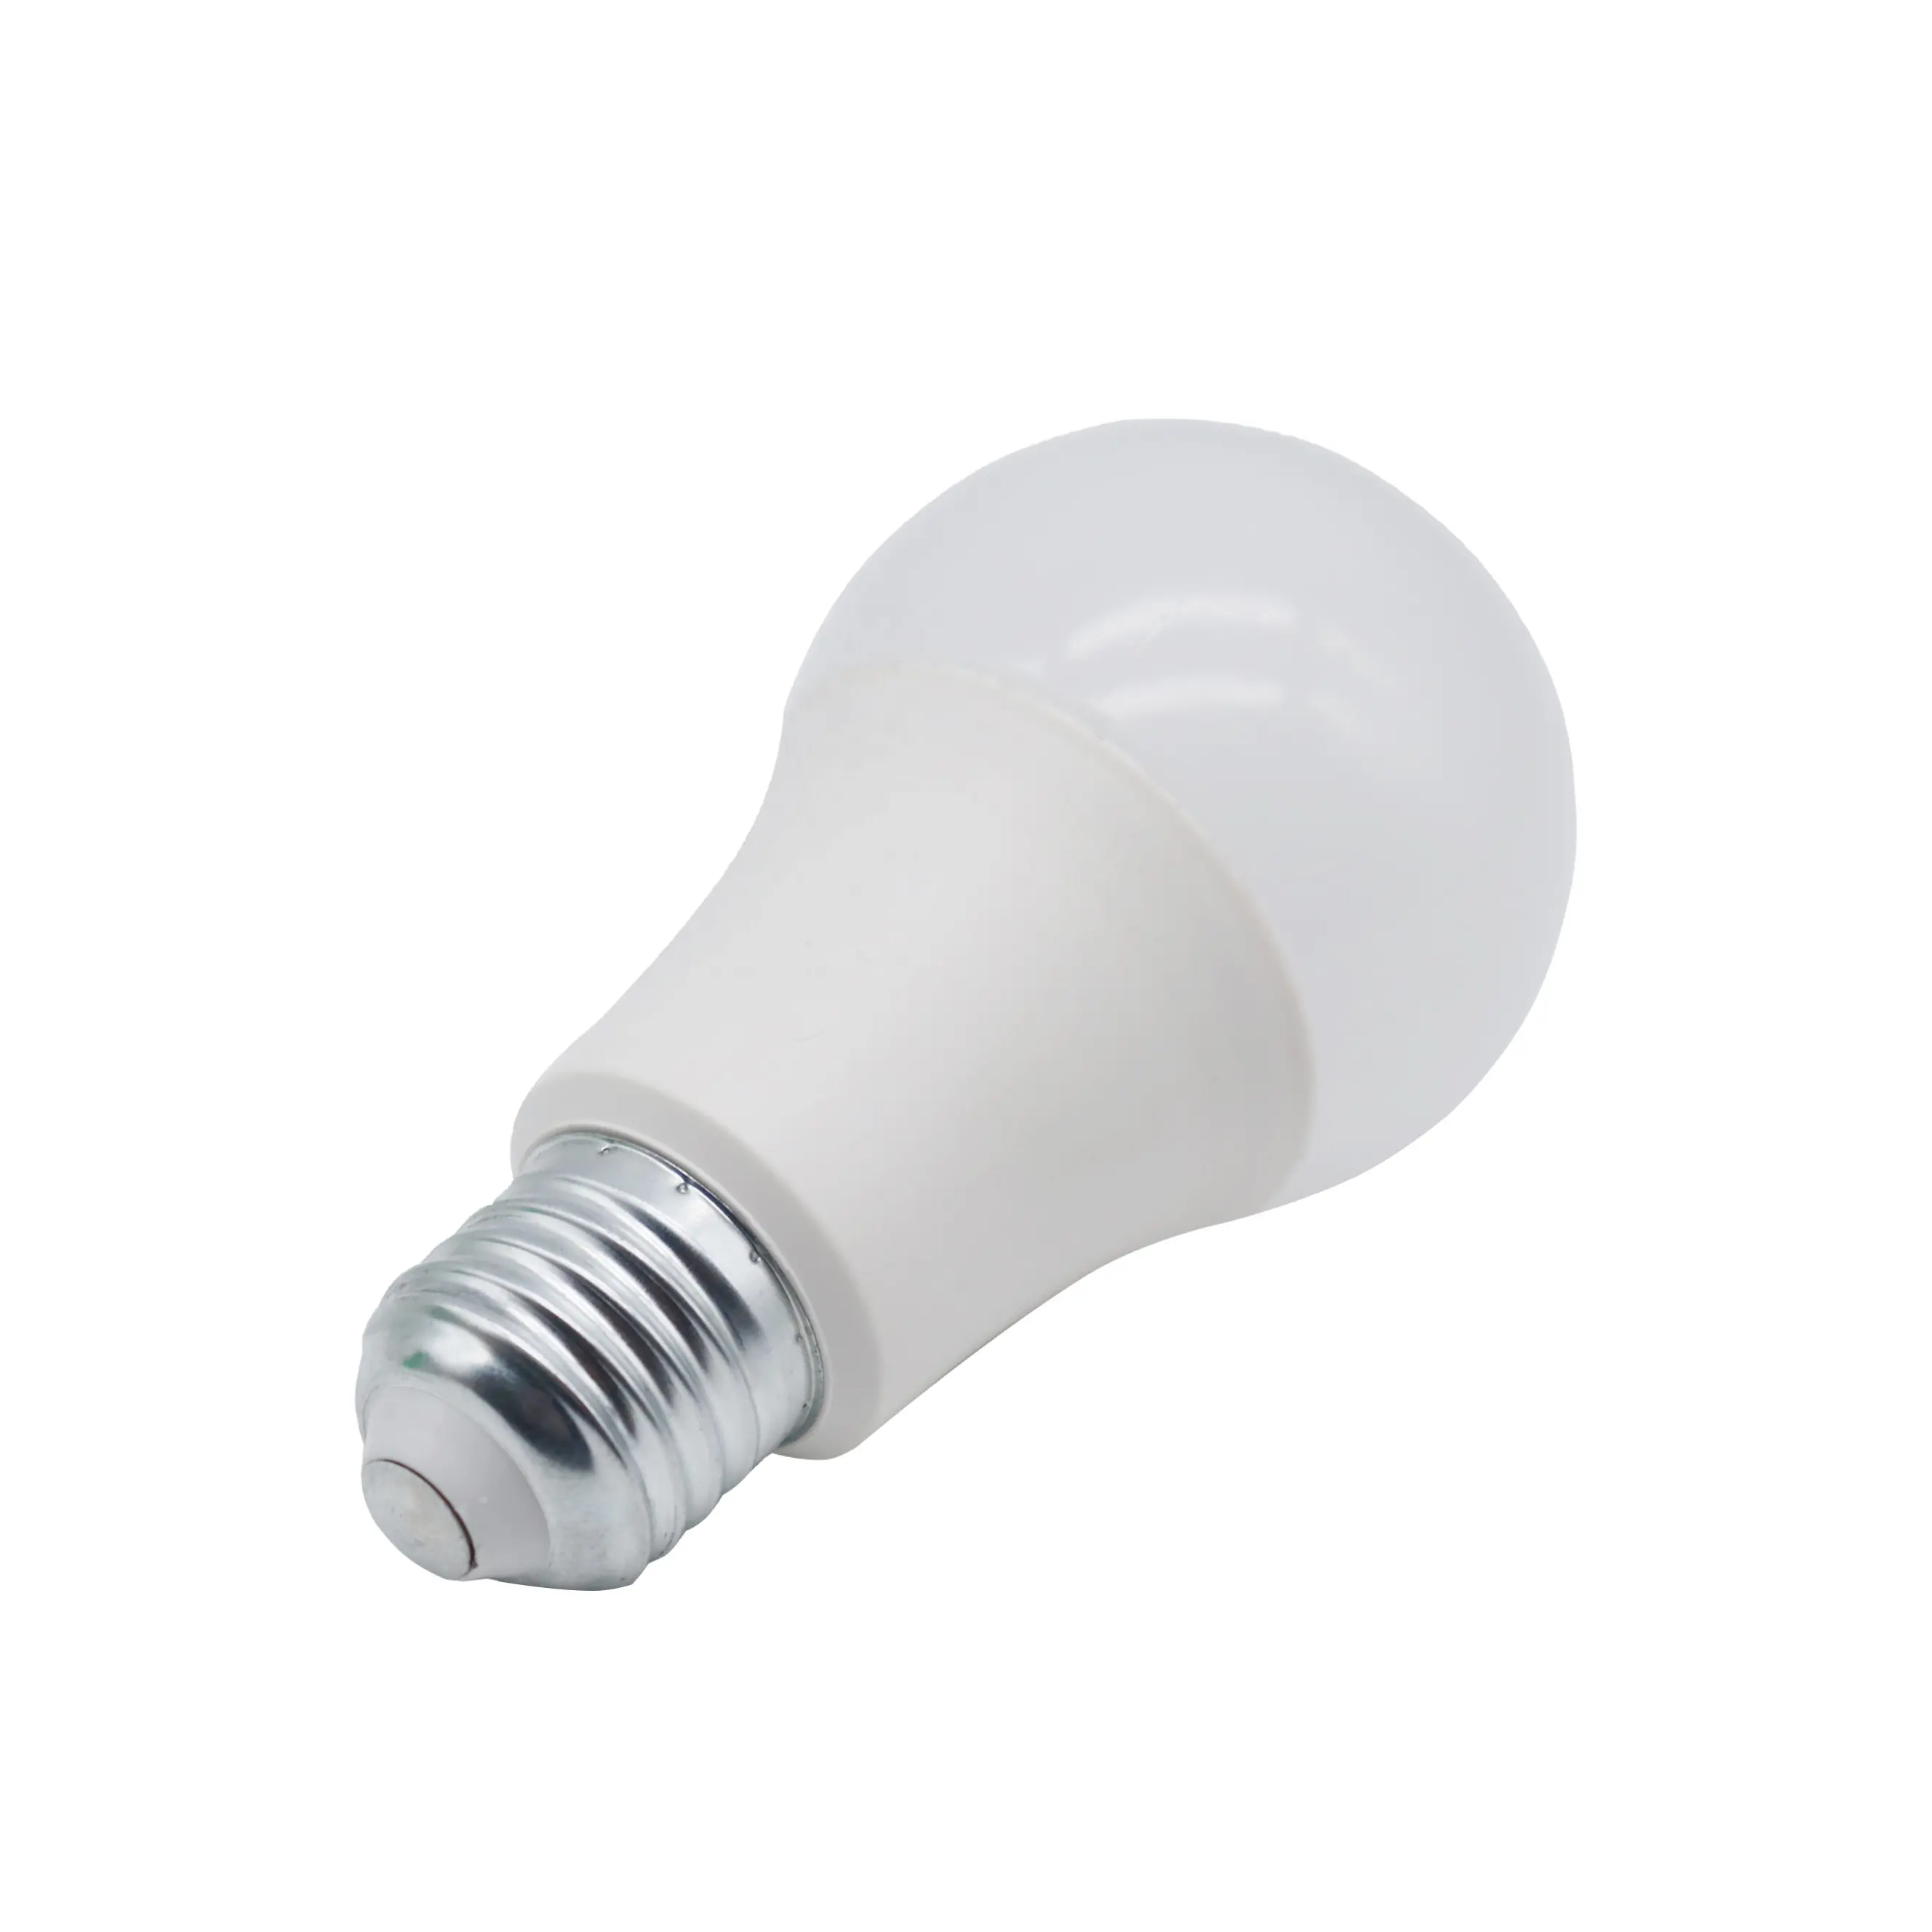 2021China supplier Home Cheap price waterproof white A Shape Bulb led lamp lights